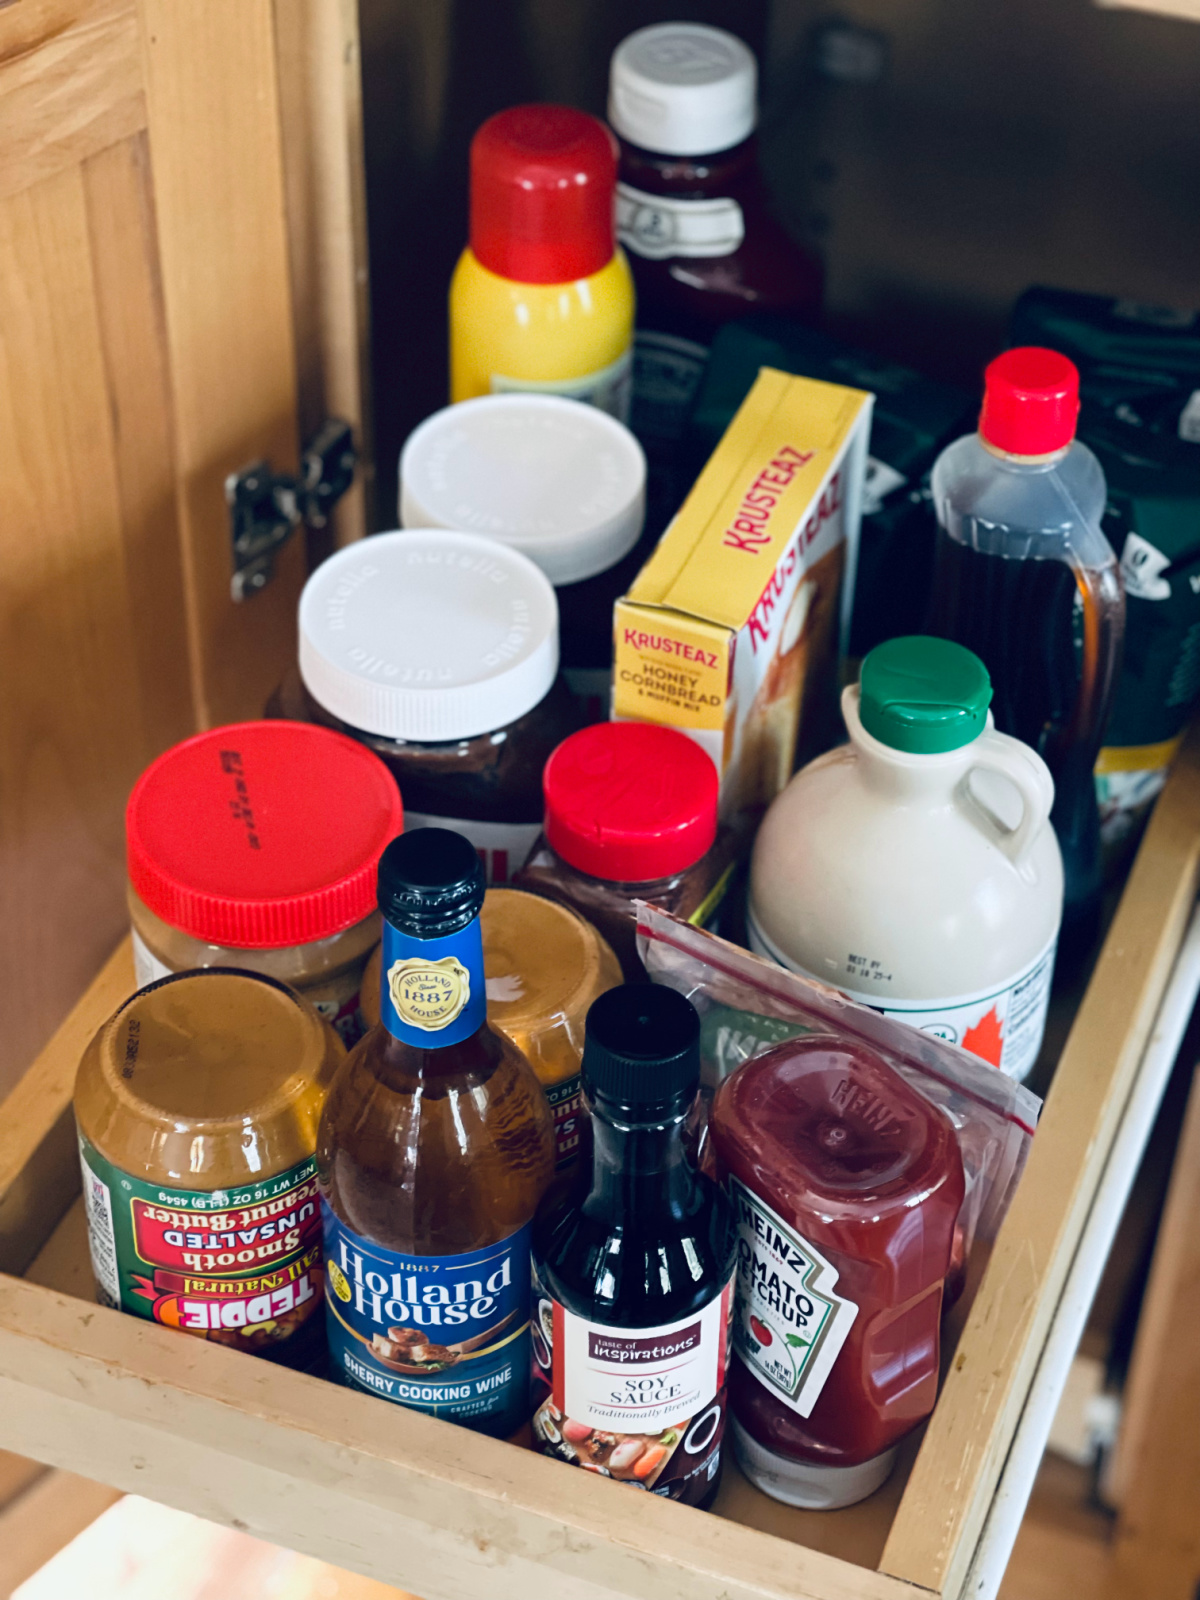 minimalist pantry shelf with extra condiments, oils, syrups and other staples